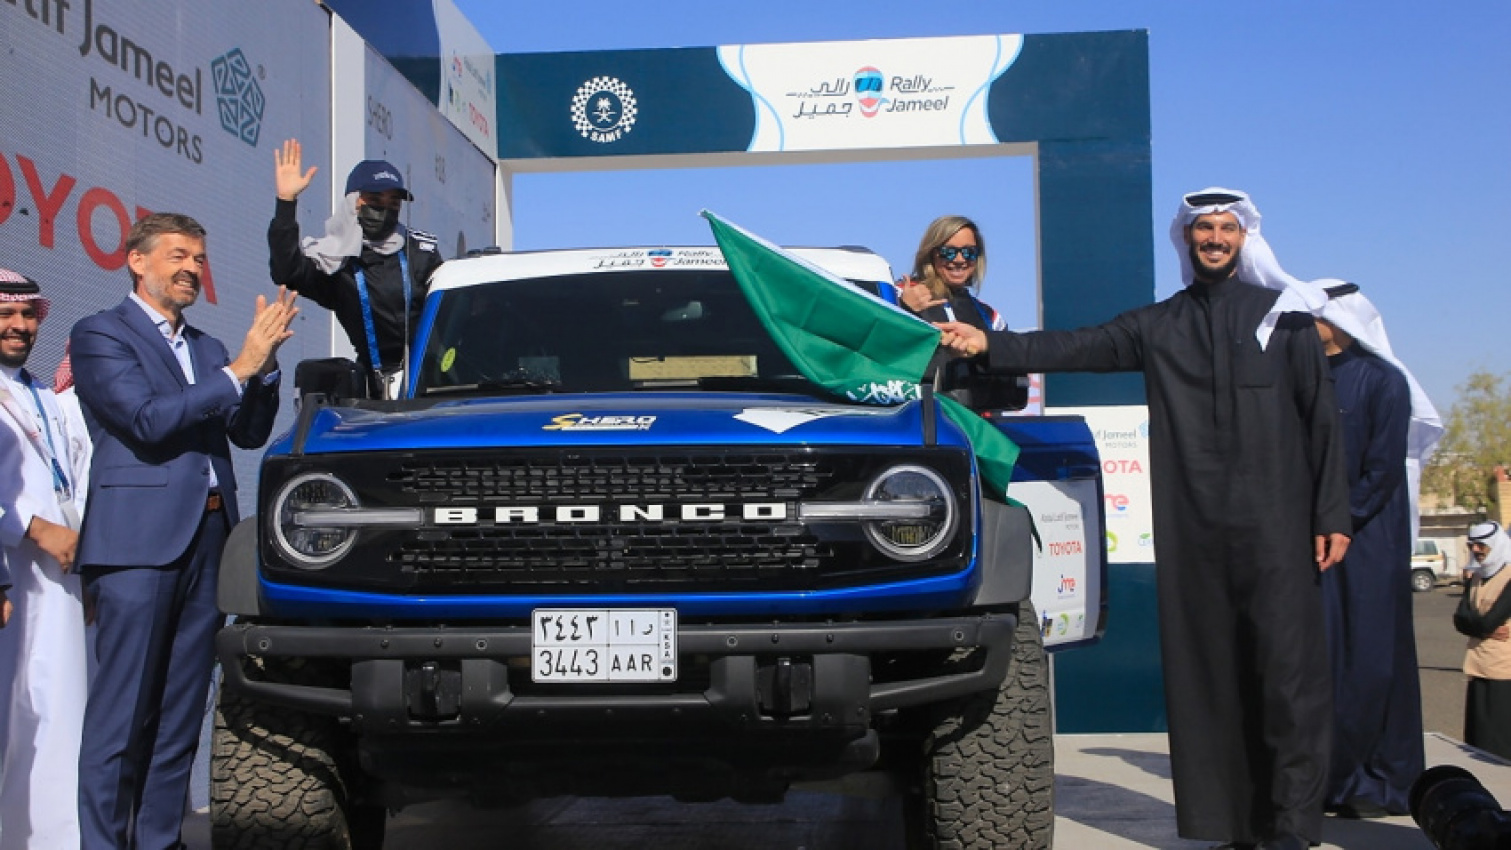 audi, autos, cars, events, highlights from the 2022 rally jameel, the first all-women’s off-road rally in saudi arabia